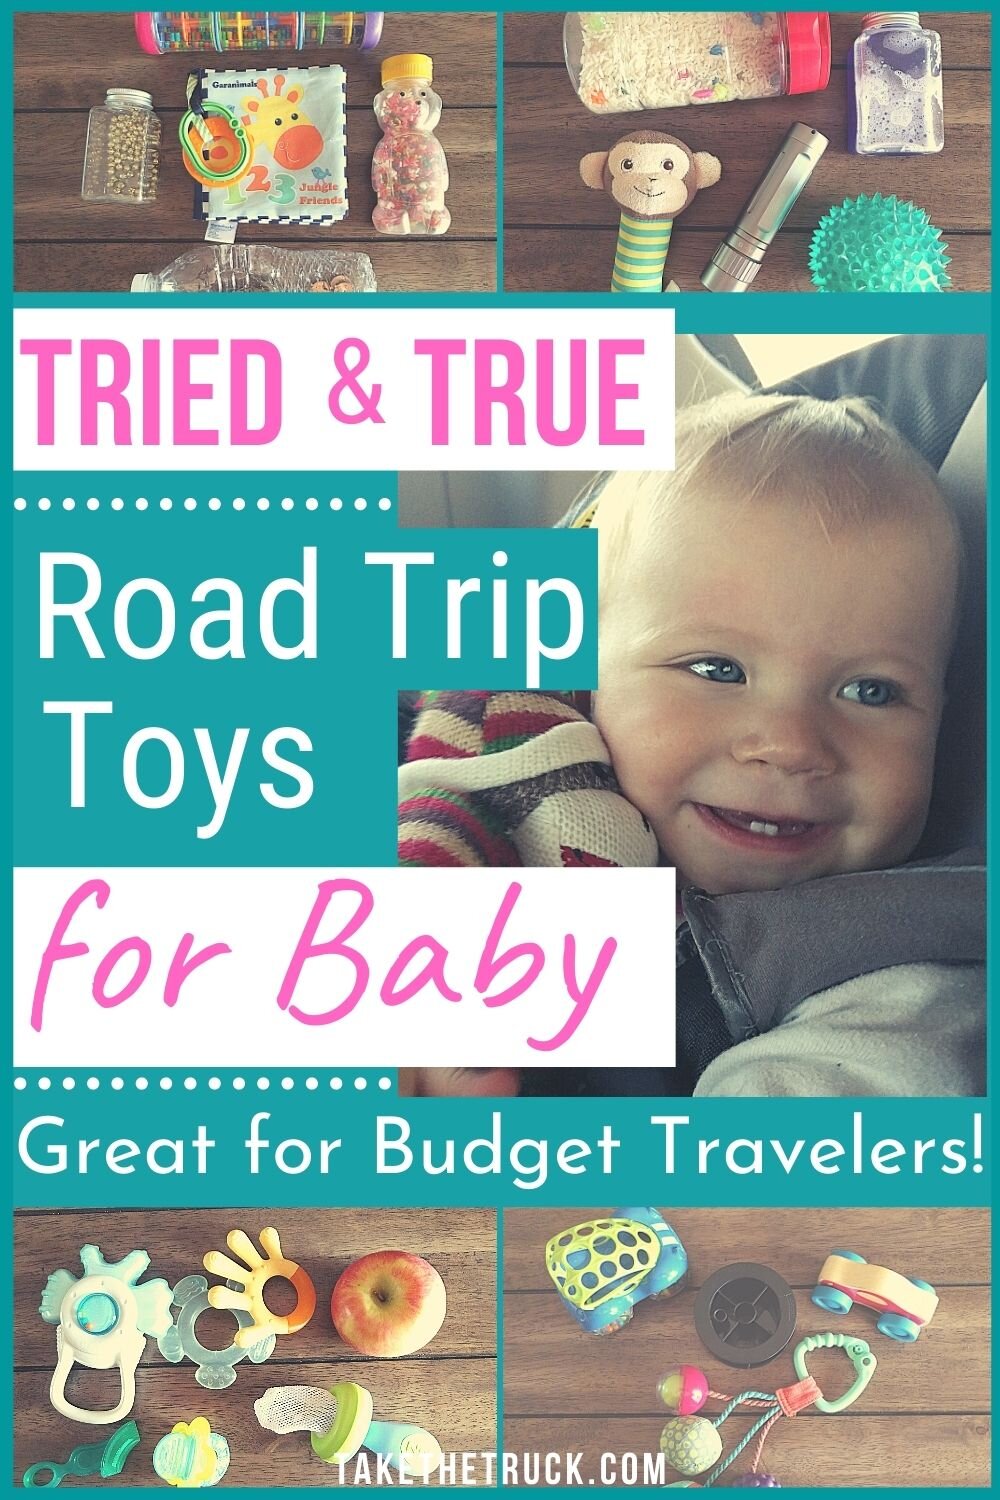 If you’re planning a budget road trip with your baby, read this post for inexpensive travel toys just right for a baby or one year old. Don’t spend your money on baby road trip travel toys!